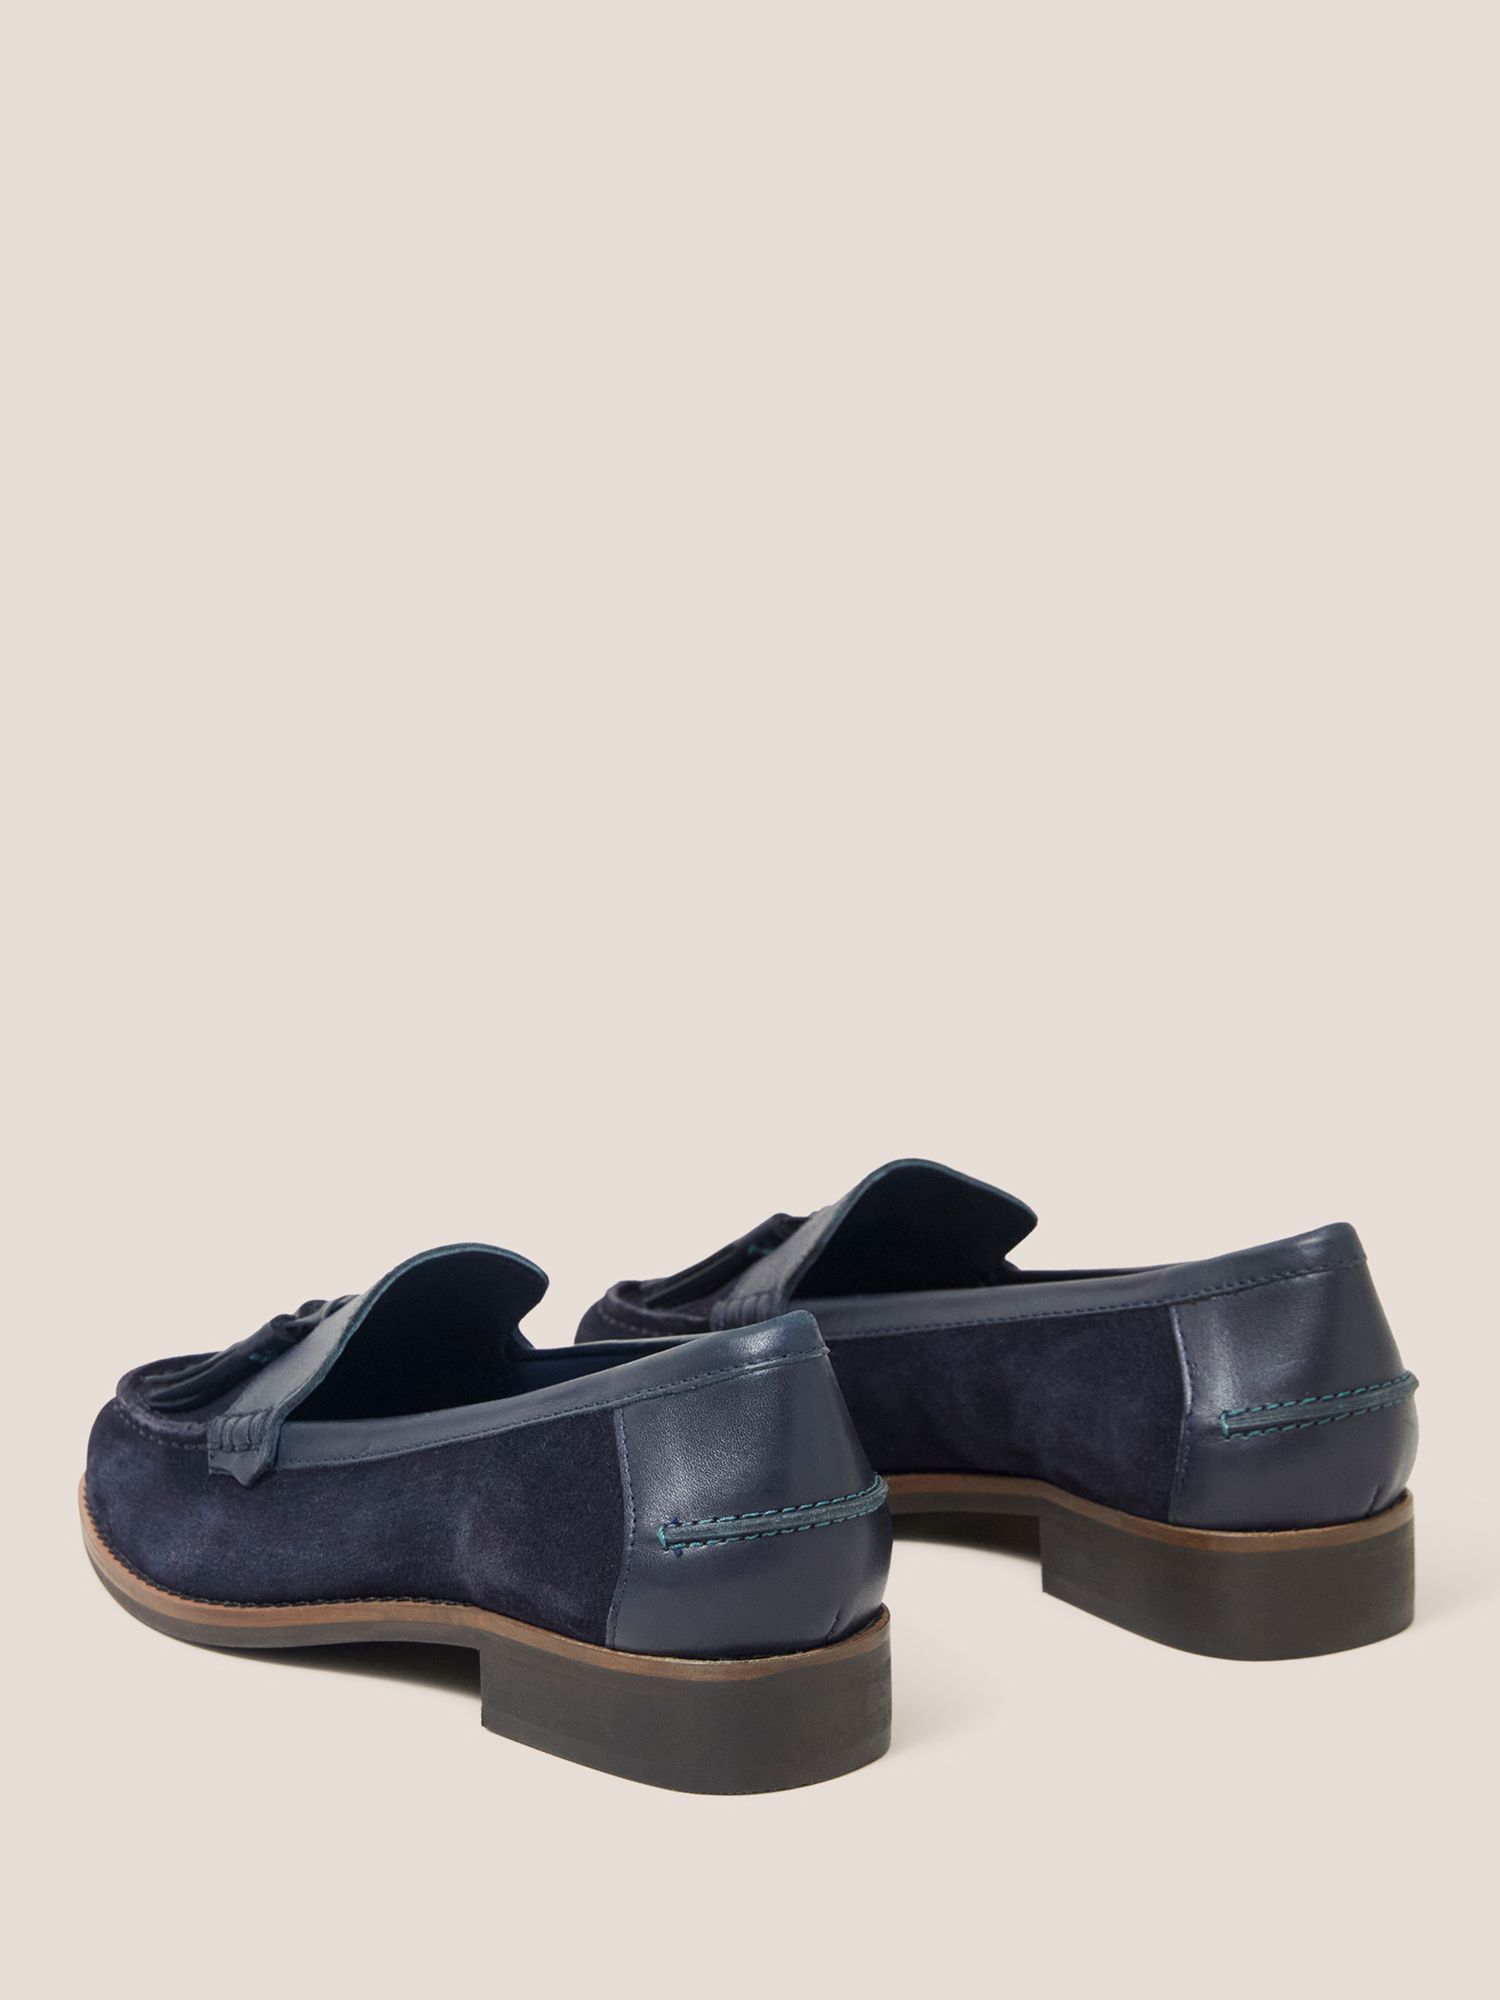 White Stuff Elba Leather And Suede Loafers, Dark navy, 3